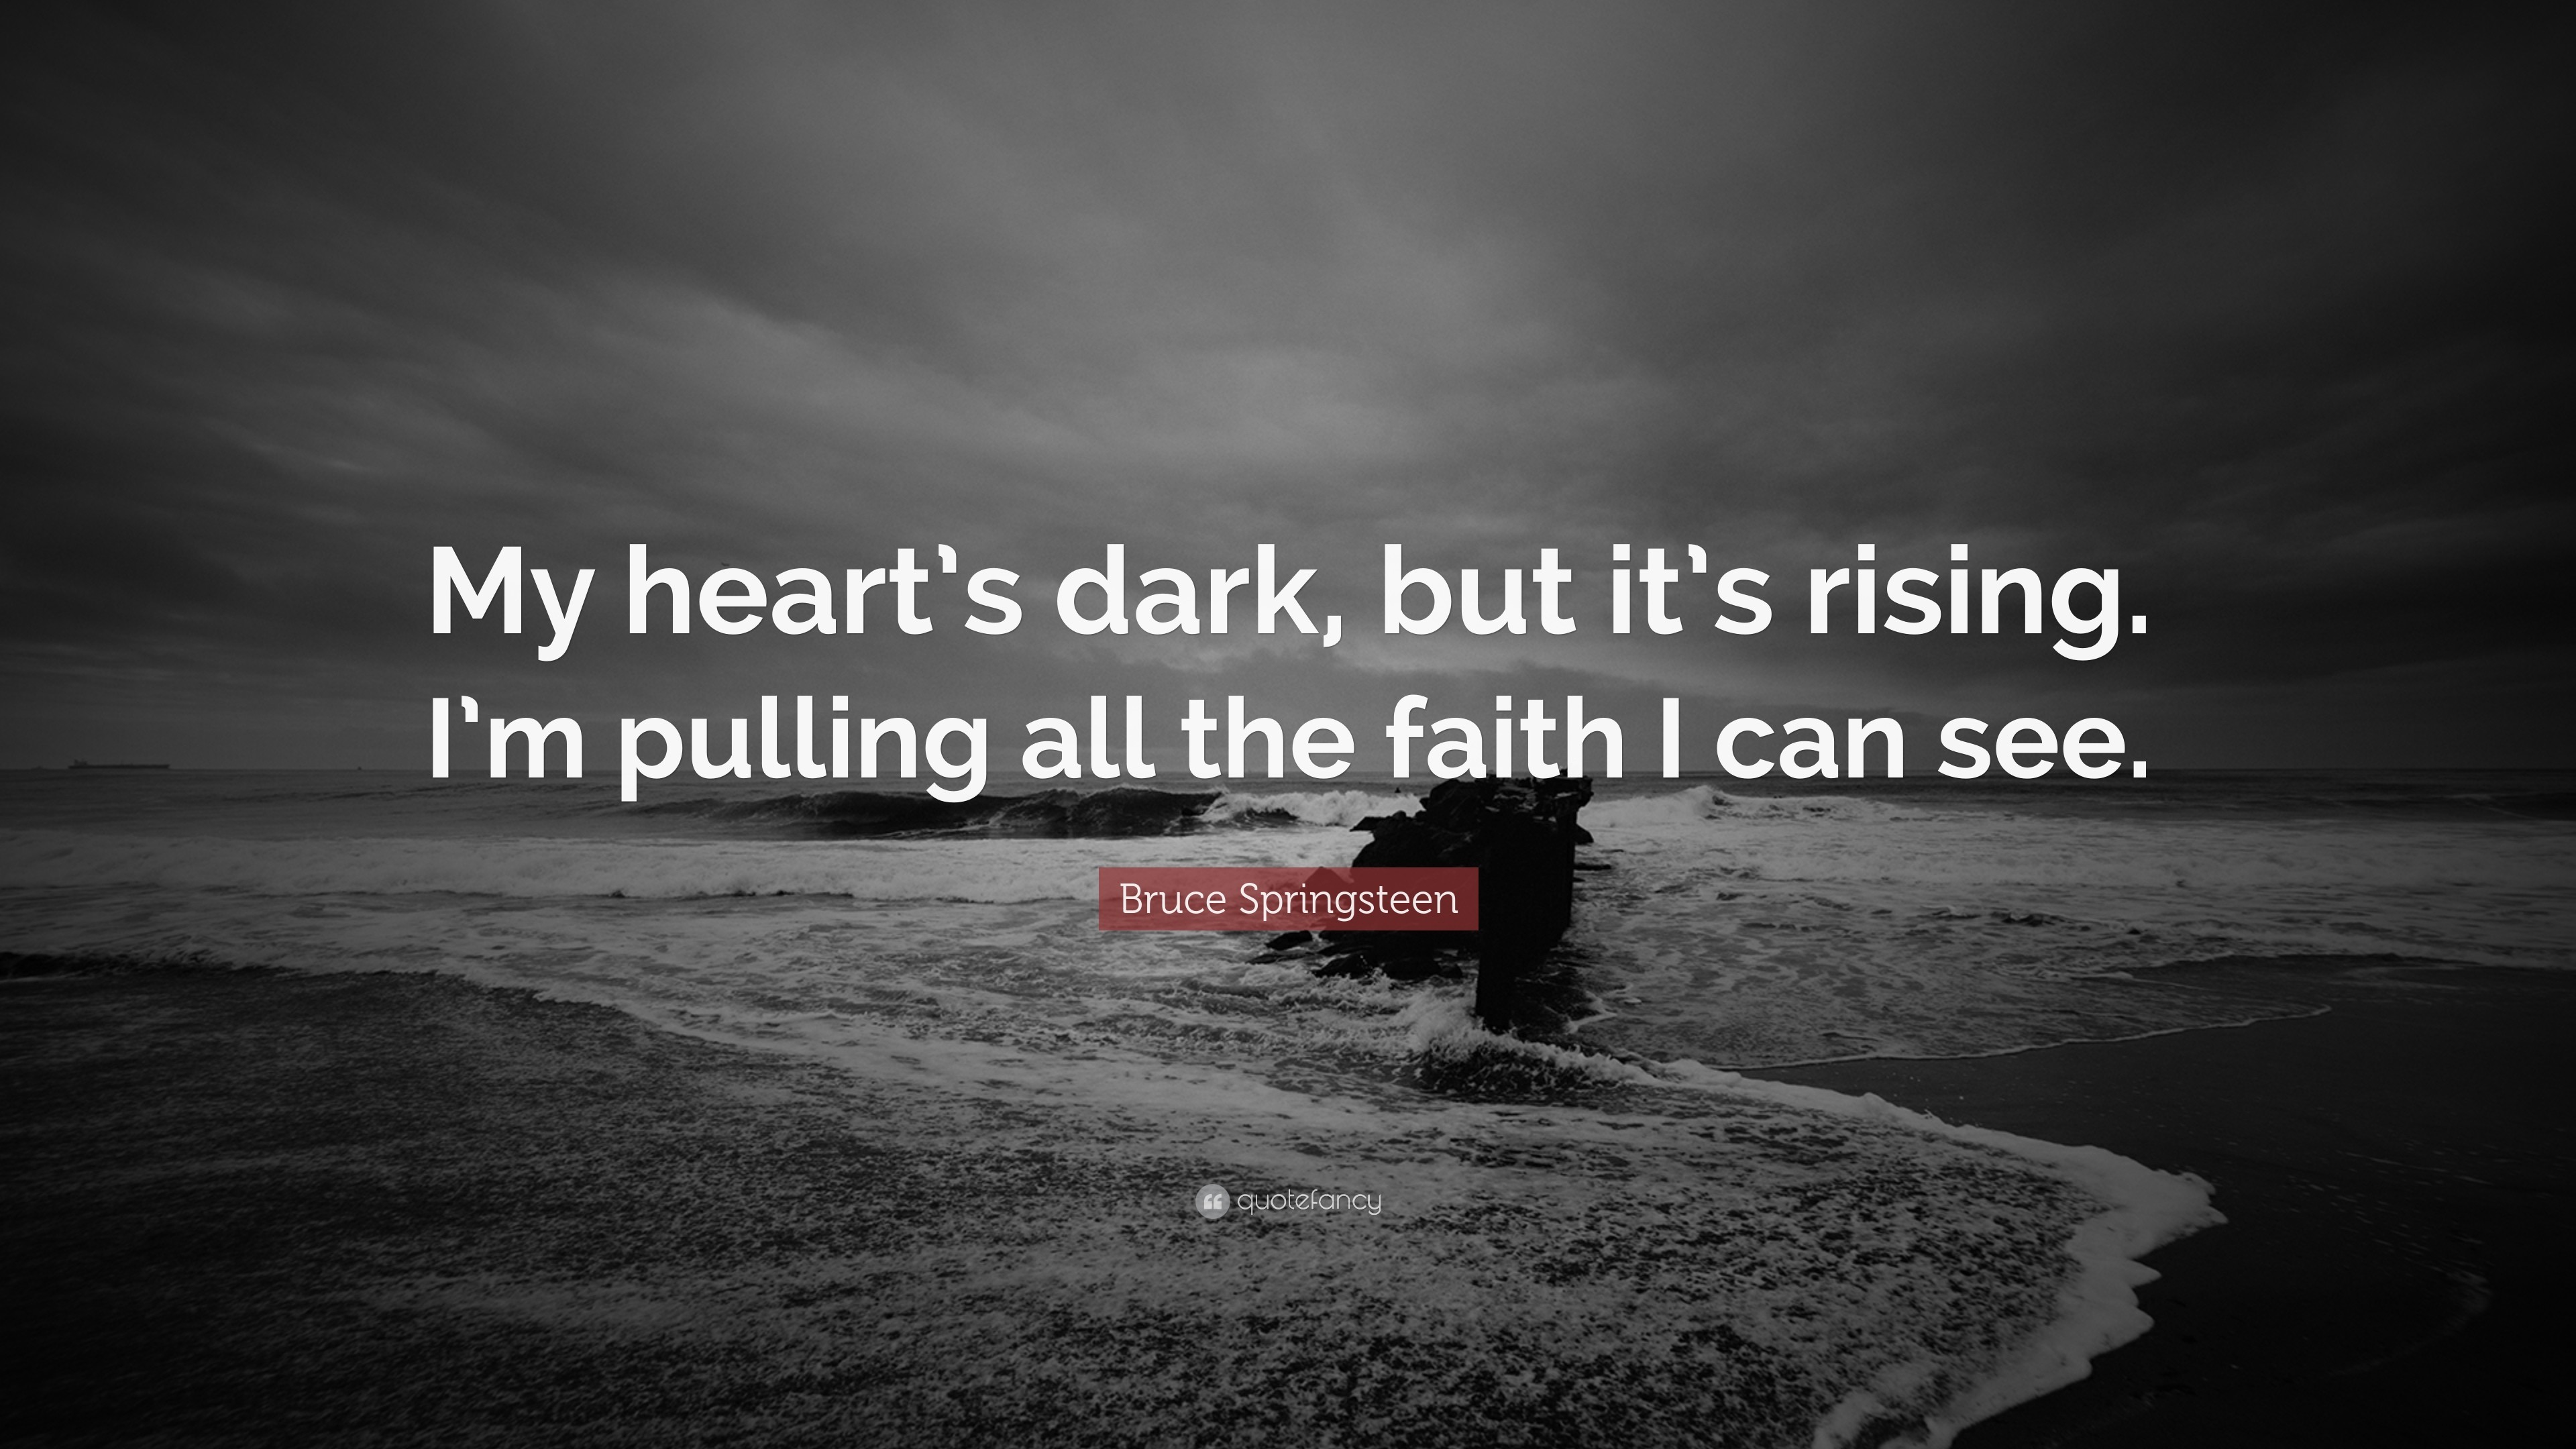 3840x2160 Bruce Springsteen Quote: “My heart's dark, but it's rising. I'm